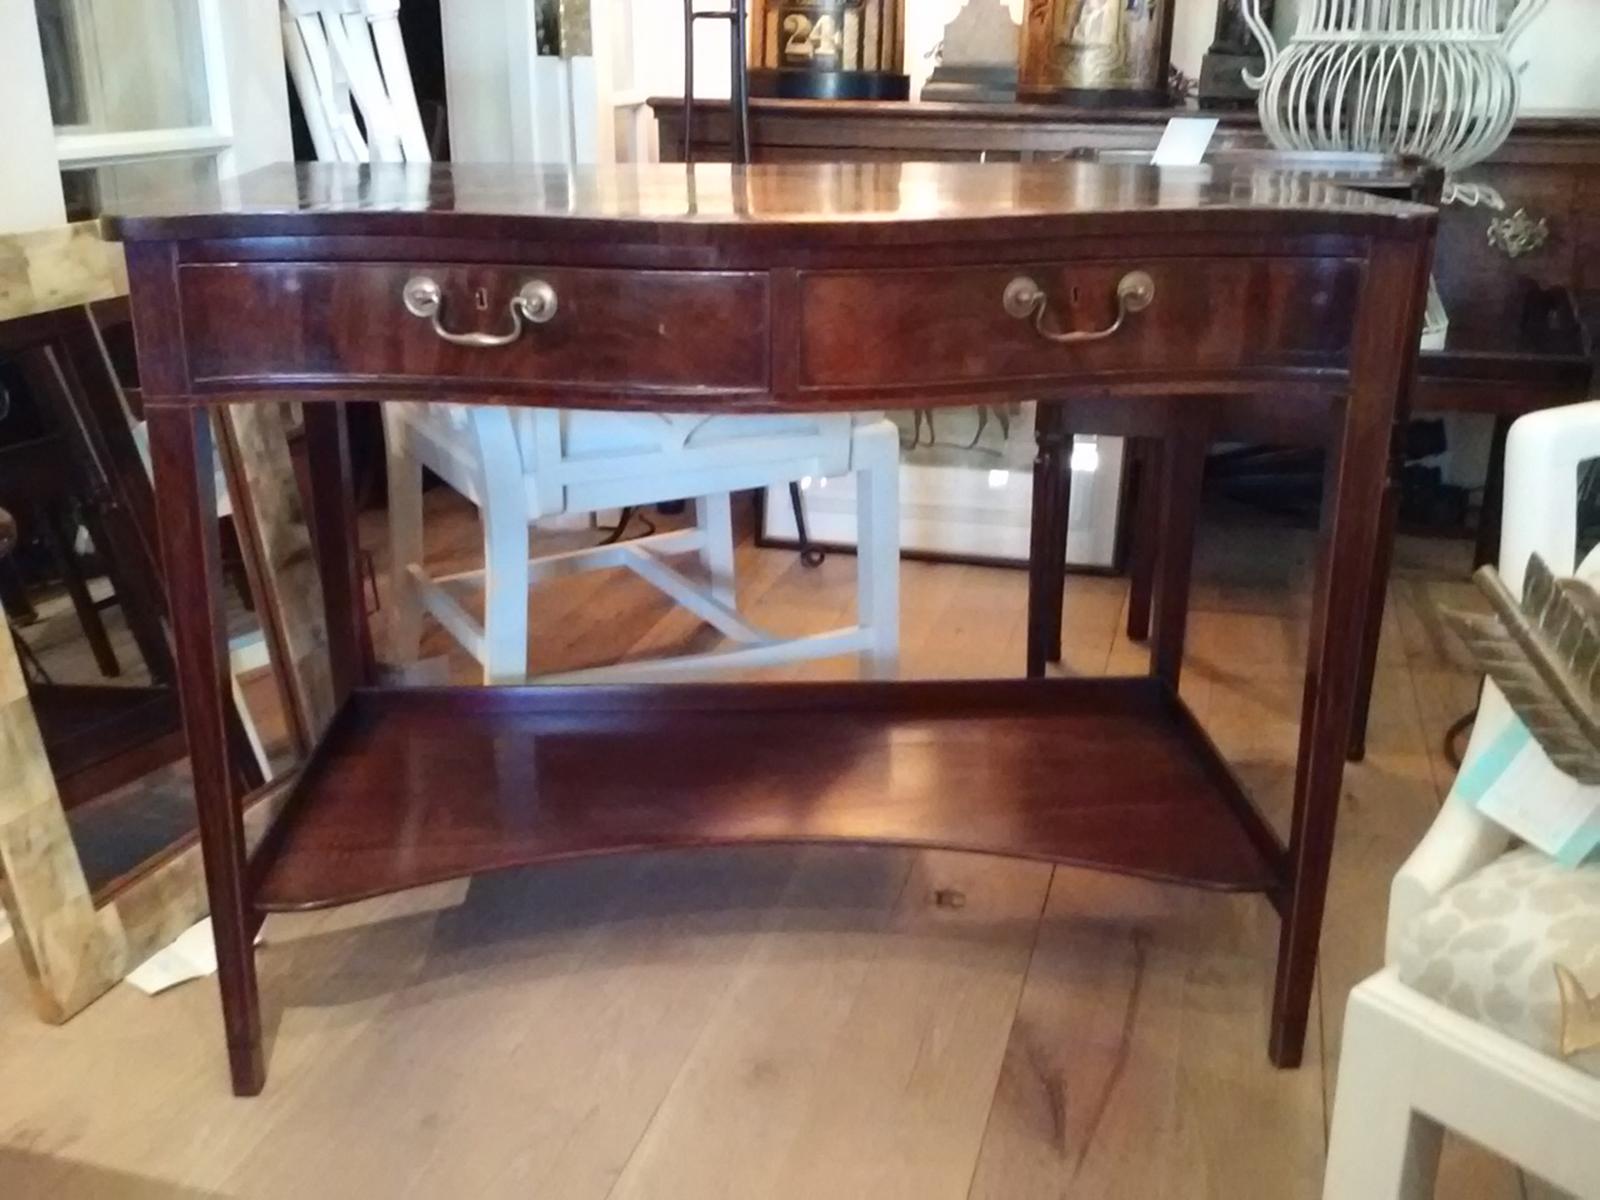 19th-20th century English Georgian style mahogany server with two drawers.